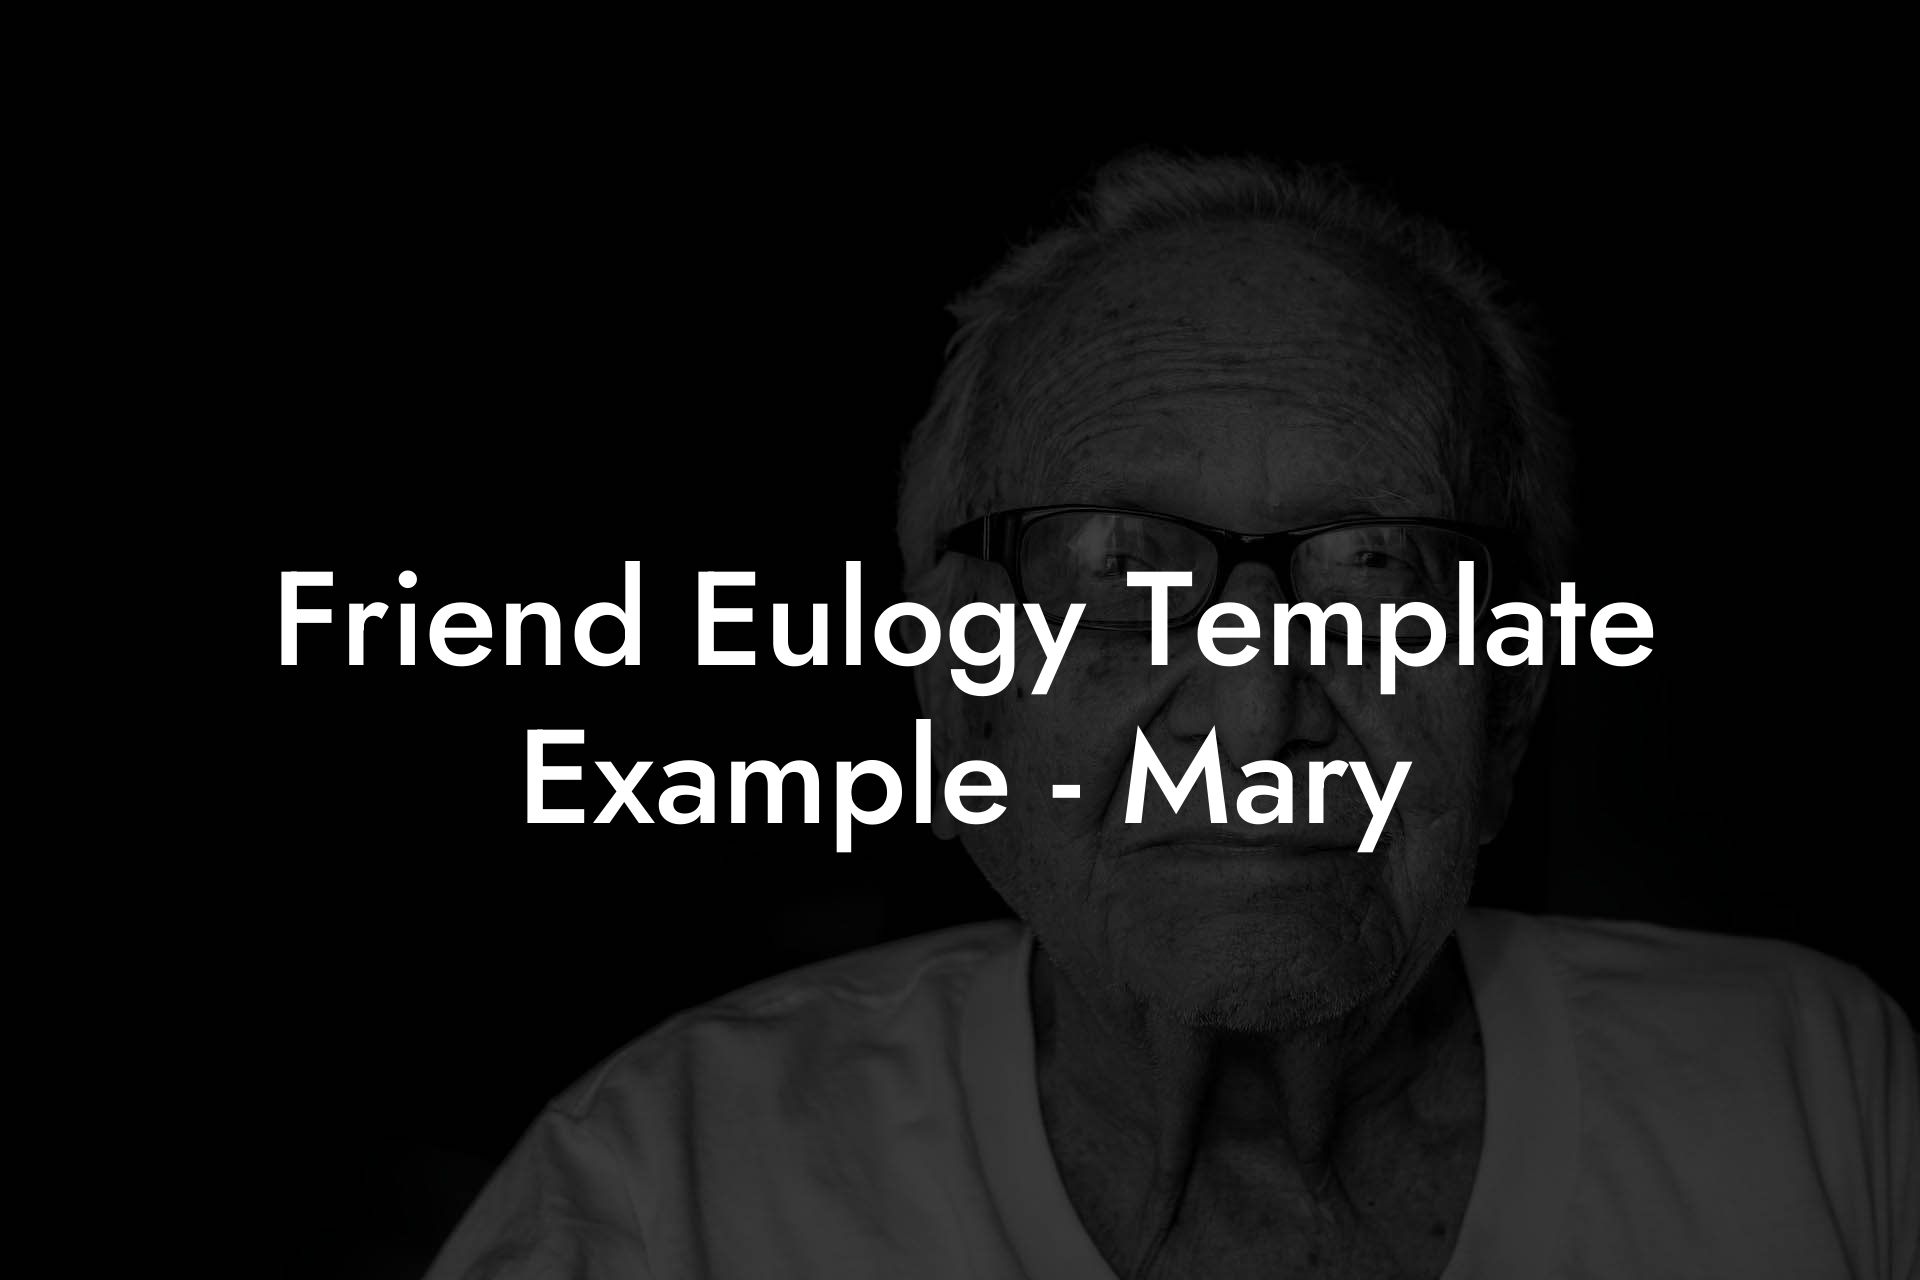 Friend Eulogy Template Example - Mary